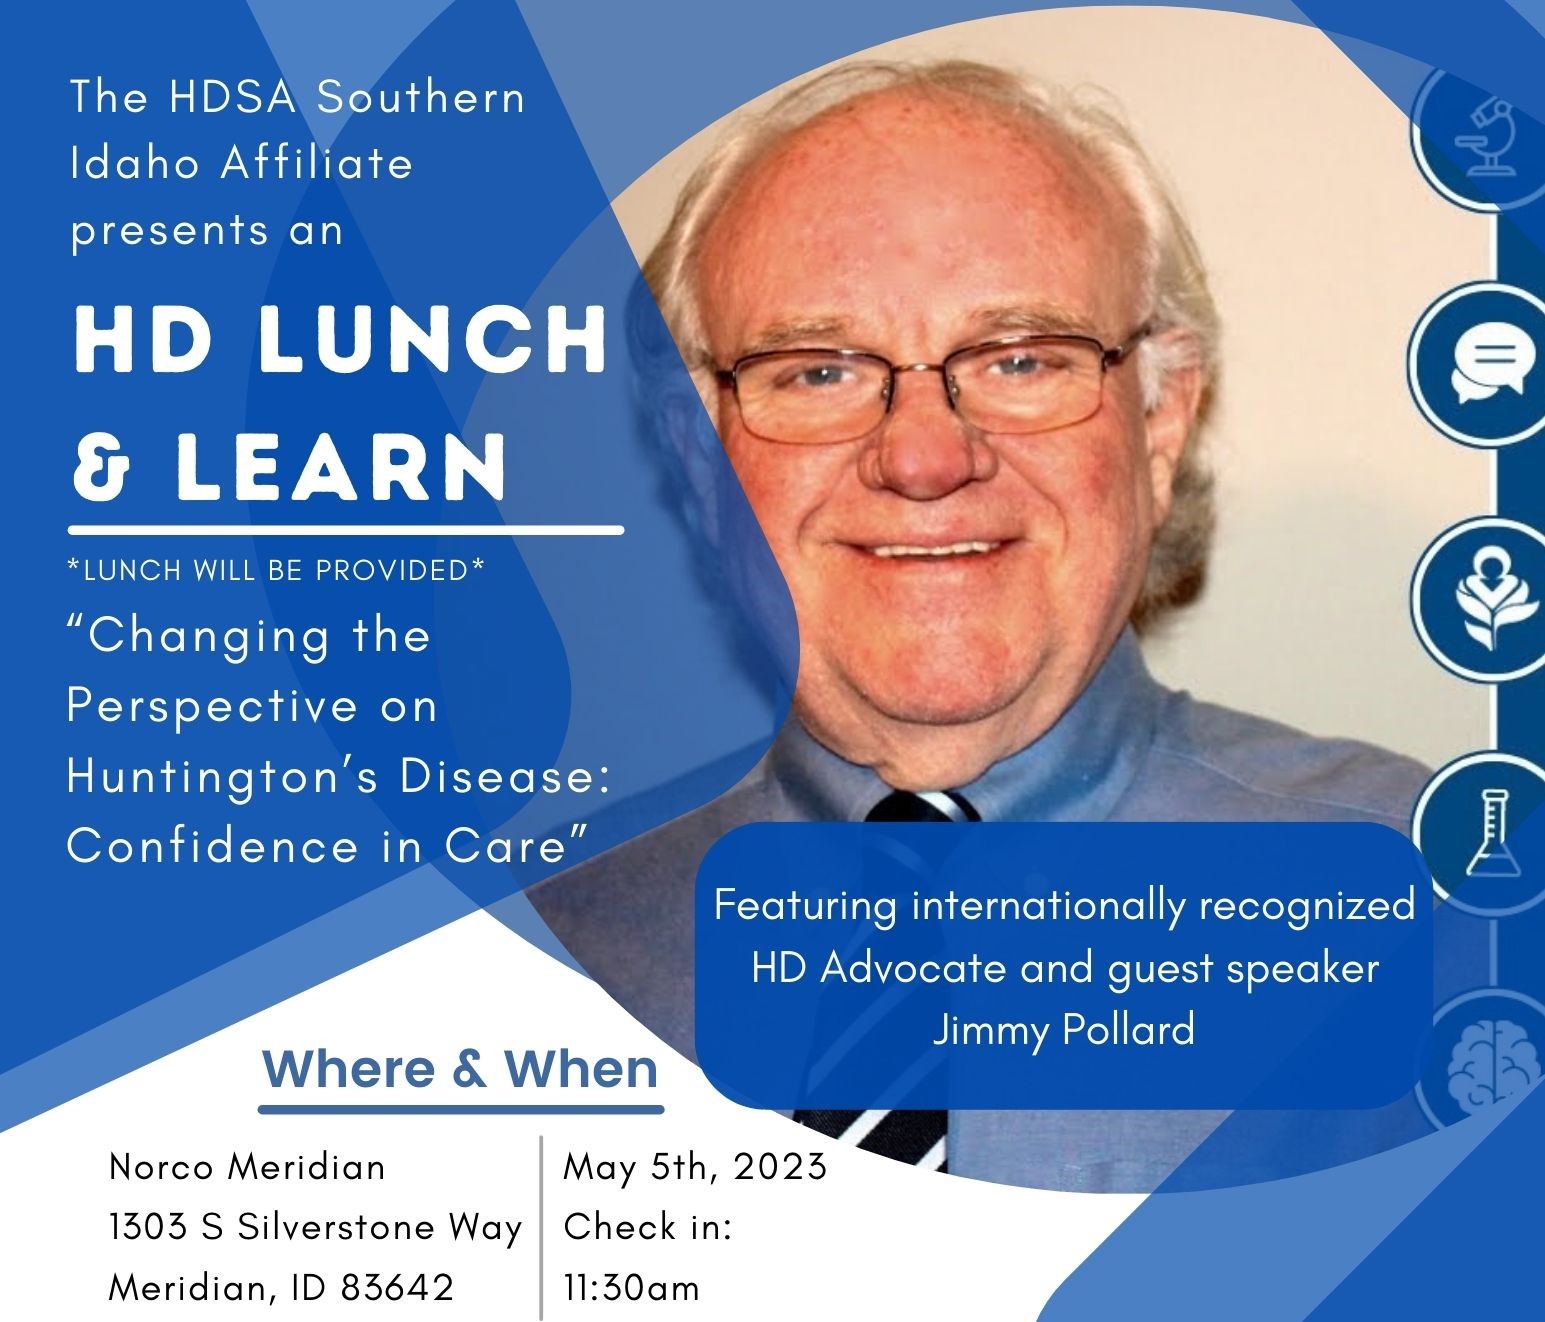 https://southernidaho.hdsa.org/events/southern-idaho-hd-lunch-learn